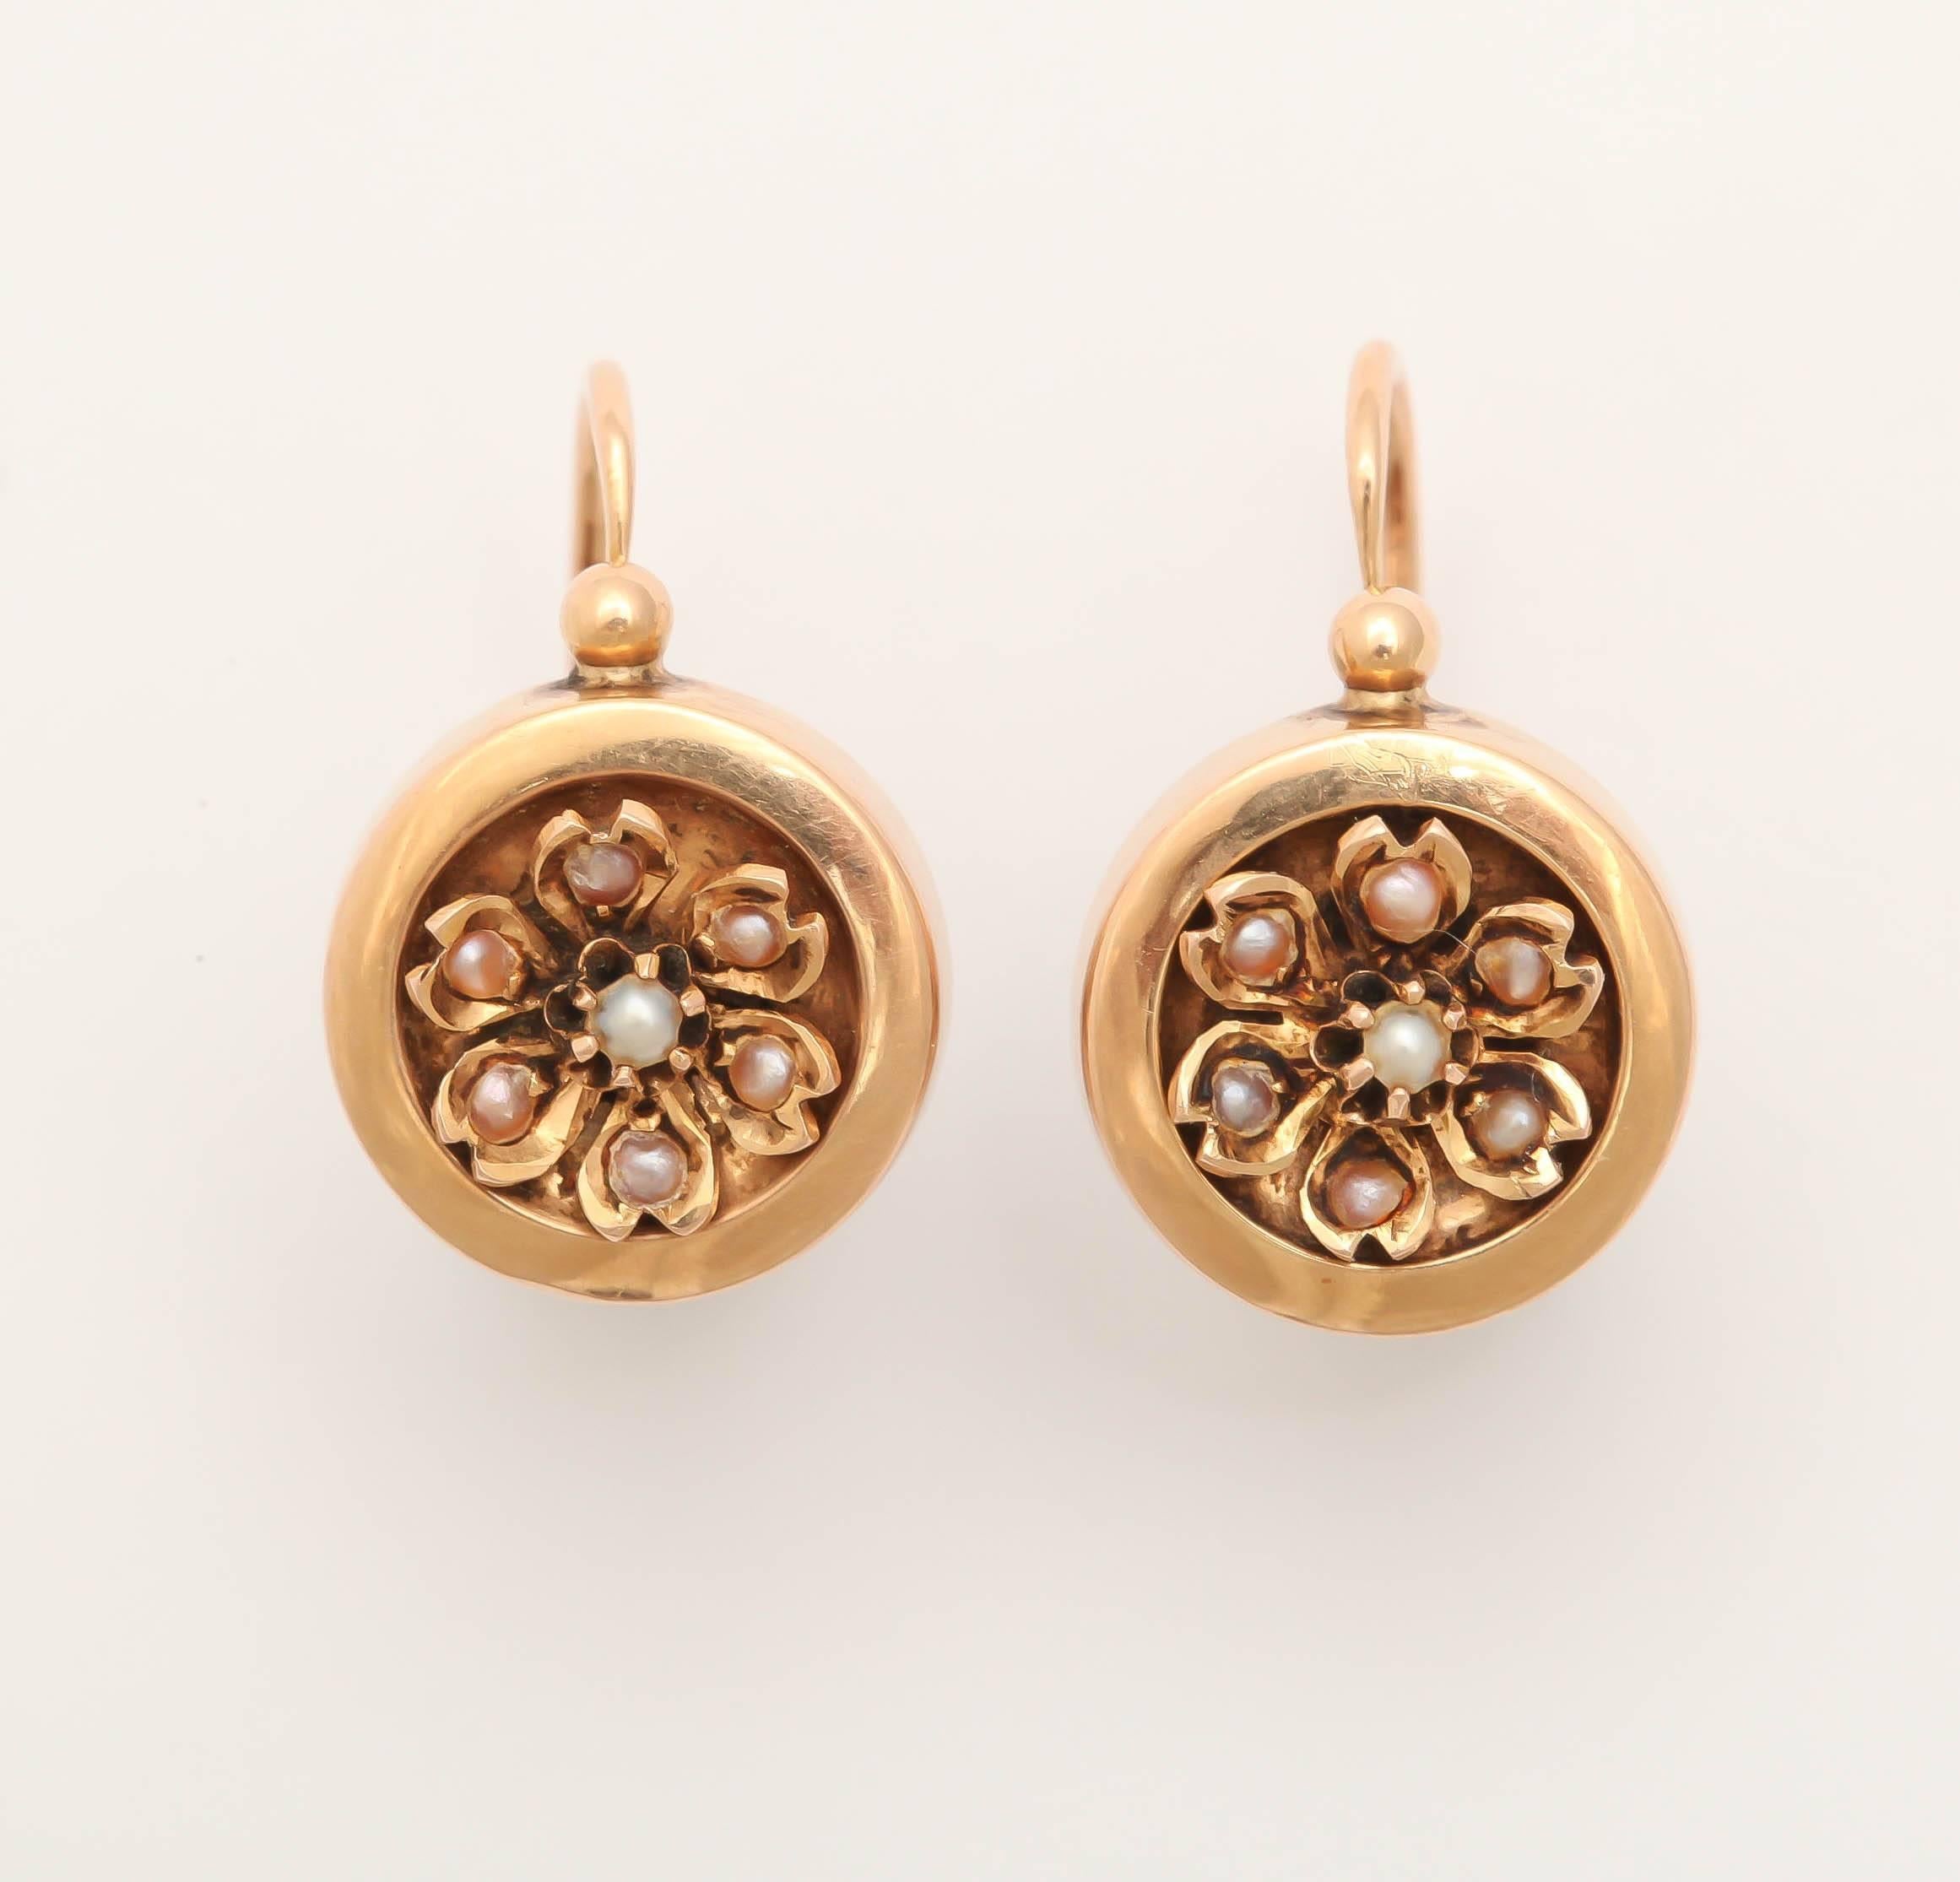 Of 18k rose gold enhanced with seed pearl flowers, attached to wires that open from the front of earring. All original, hallmarked.

France, 19th century. 

Earring 3/4 in. (1.9 cm); size of drop: